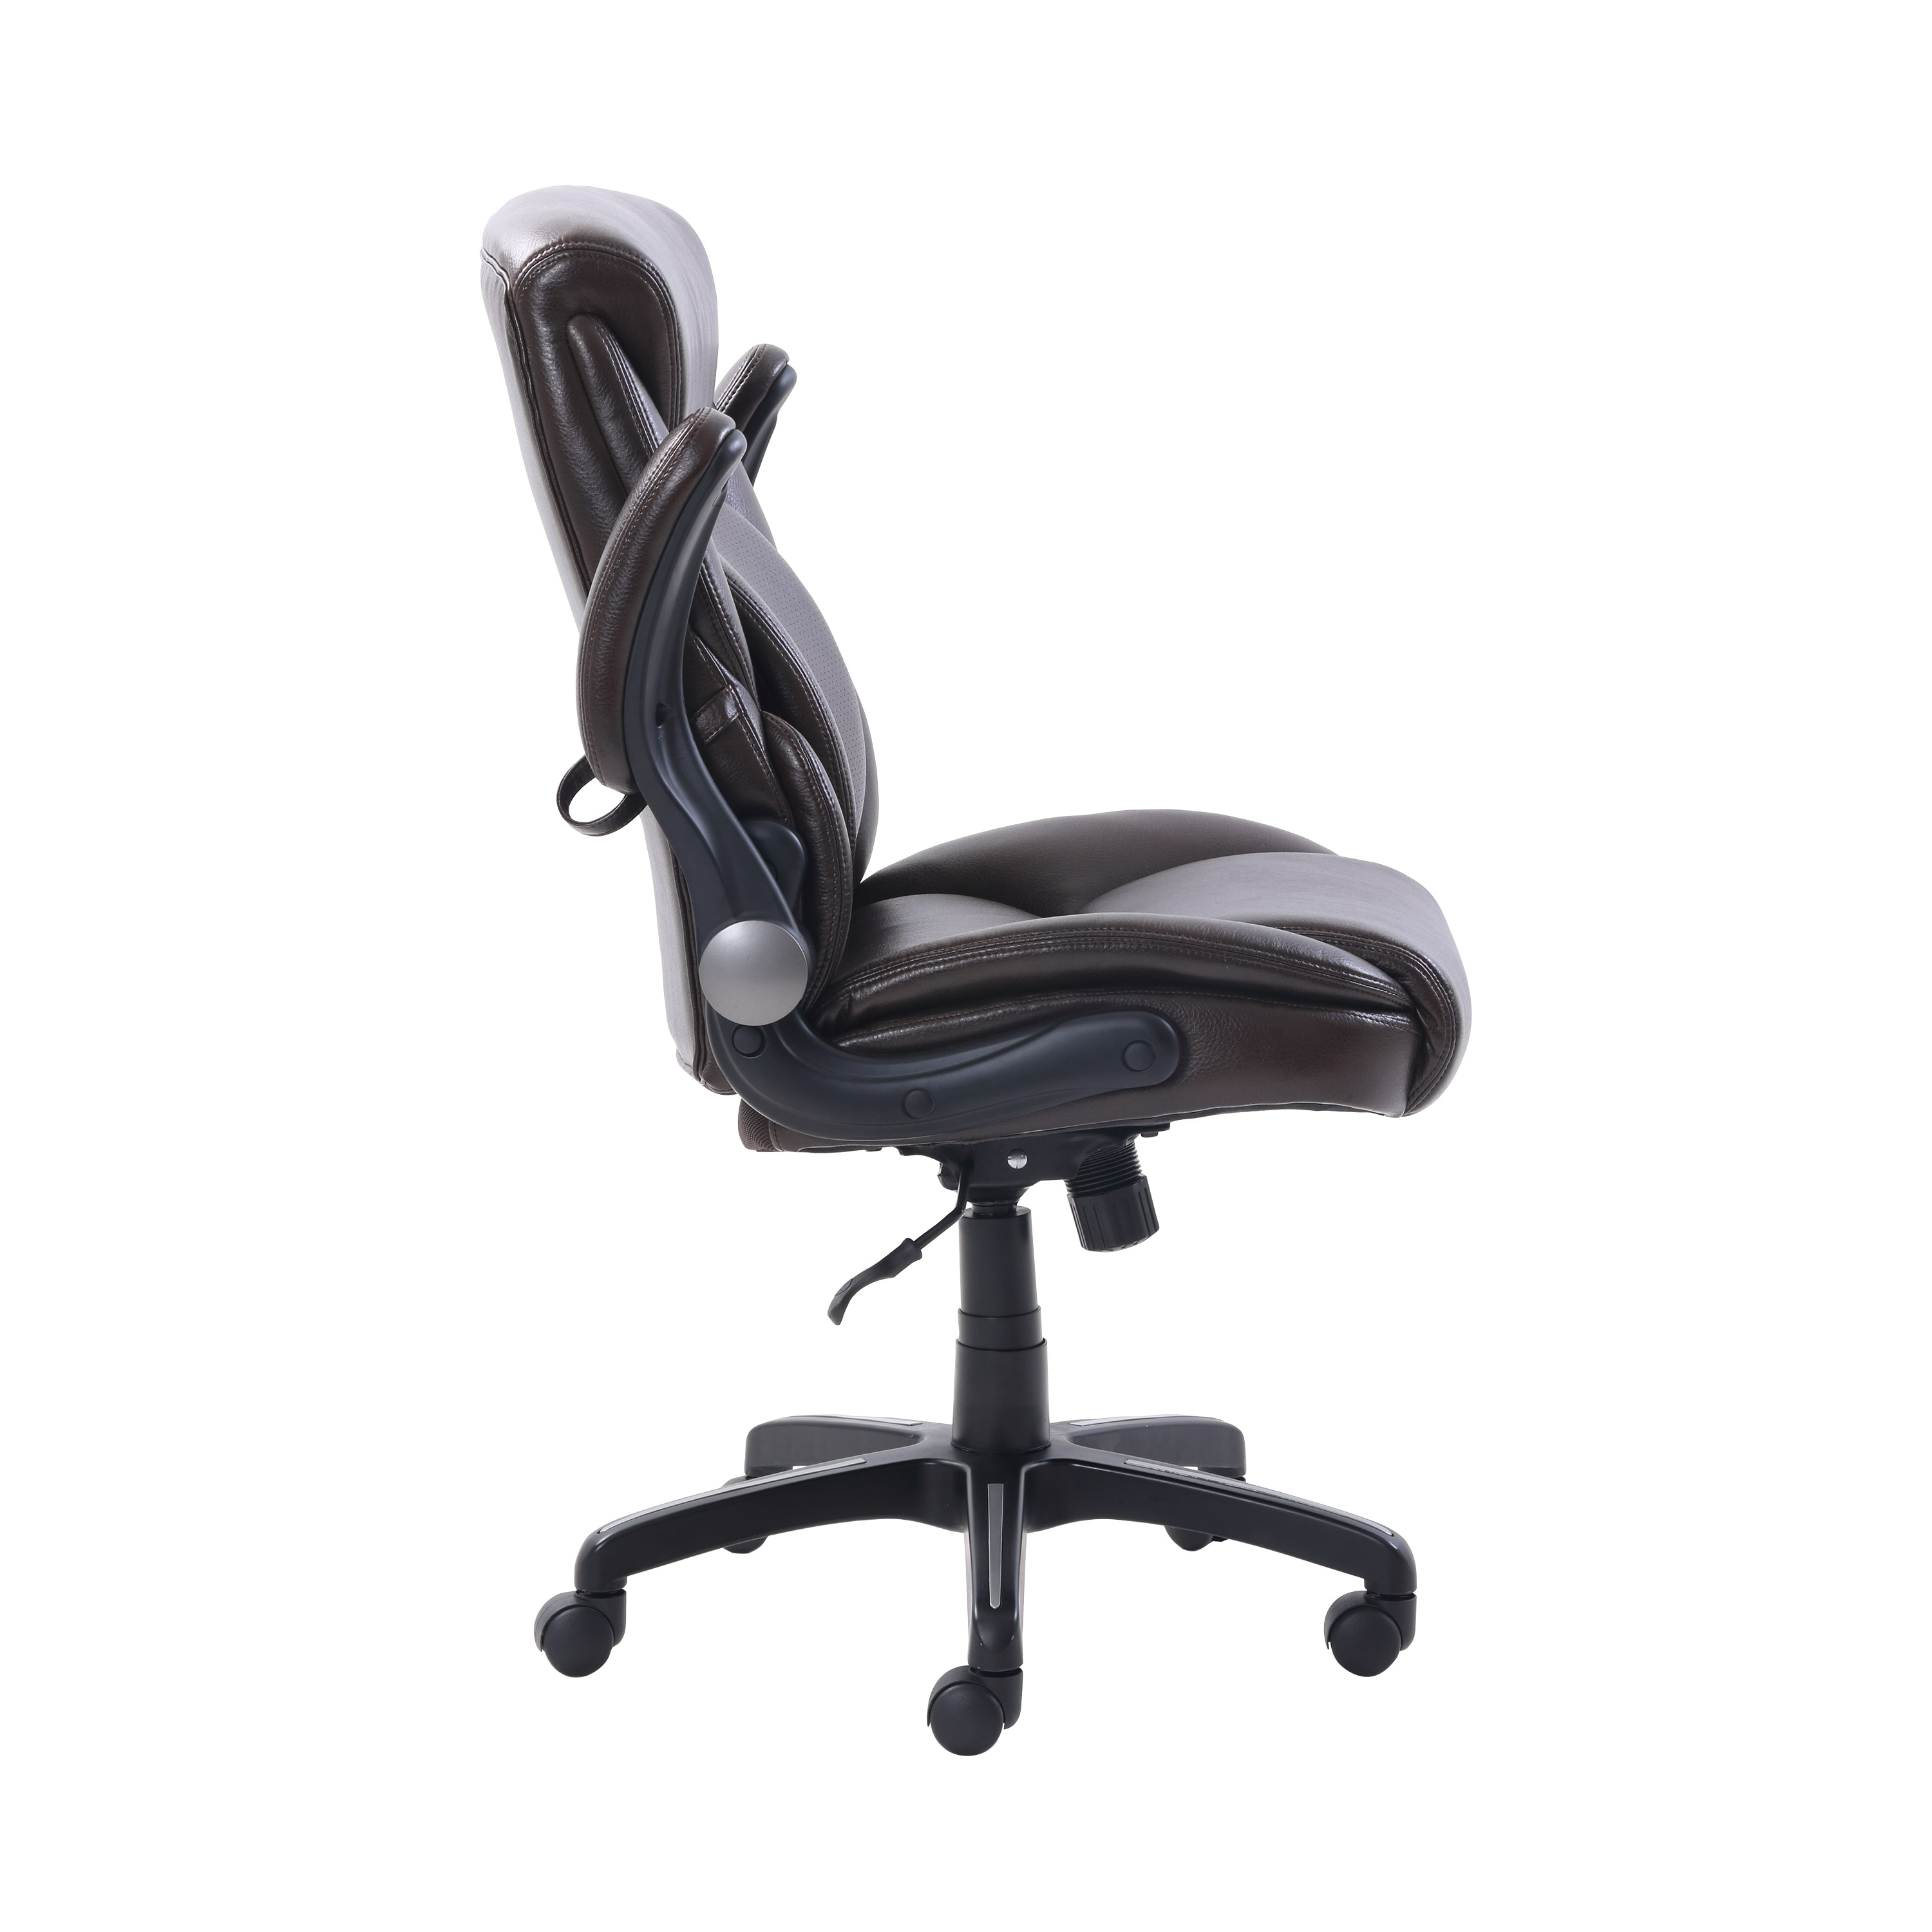 Found a Great Chair for Guitar with Lumbar Support-5dccc1ba-53d3-43bf-841b-379ea5fee468_1-7ed1a7477d310487b00430837efee3be-jpeg